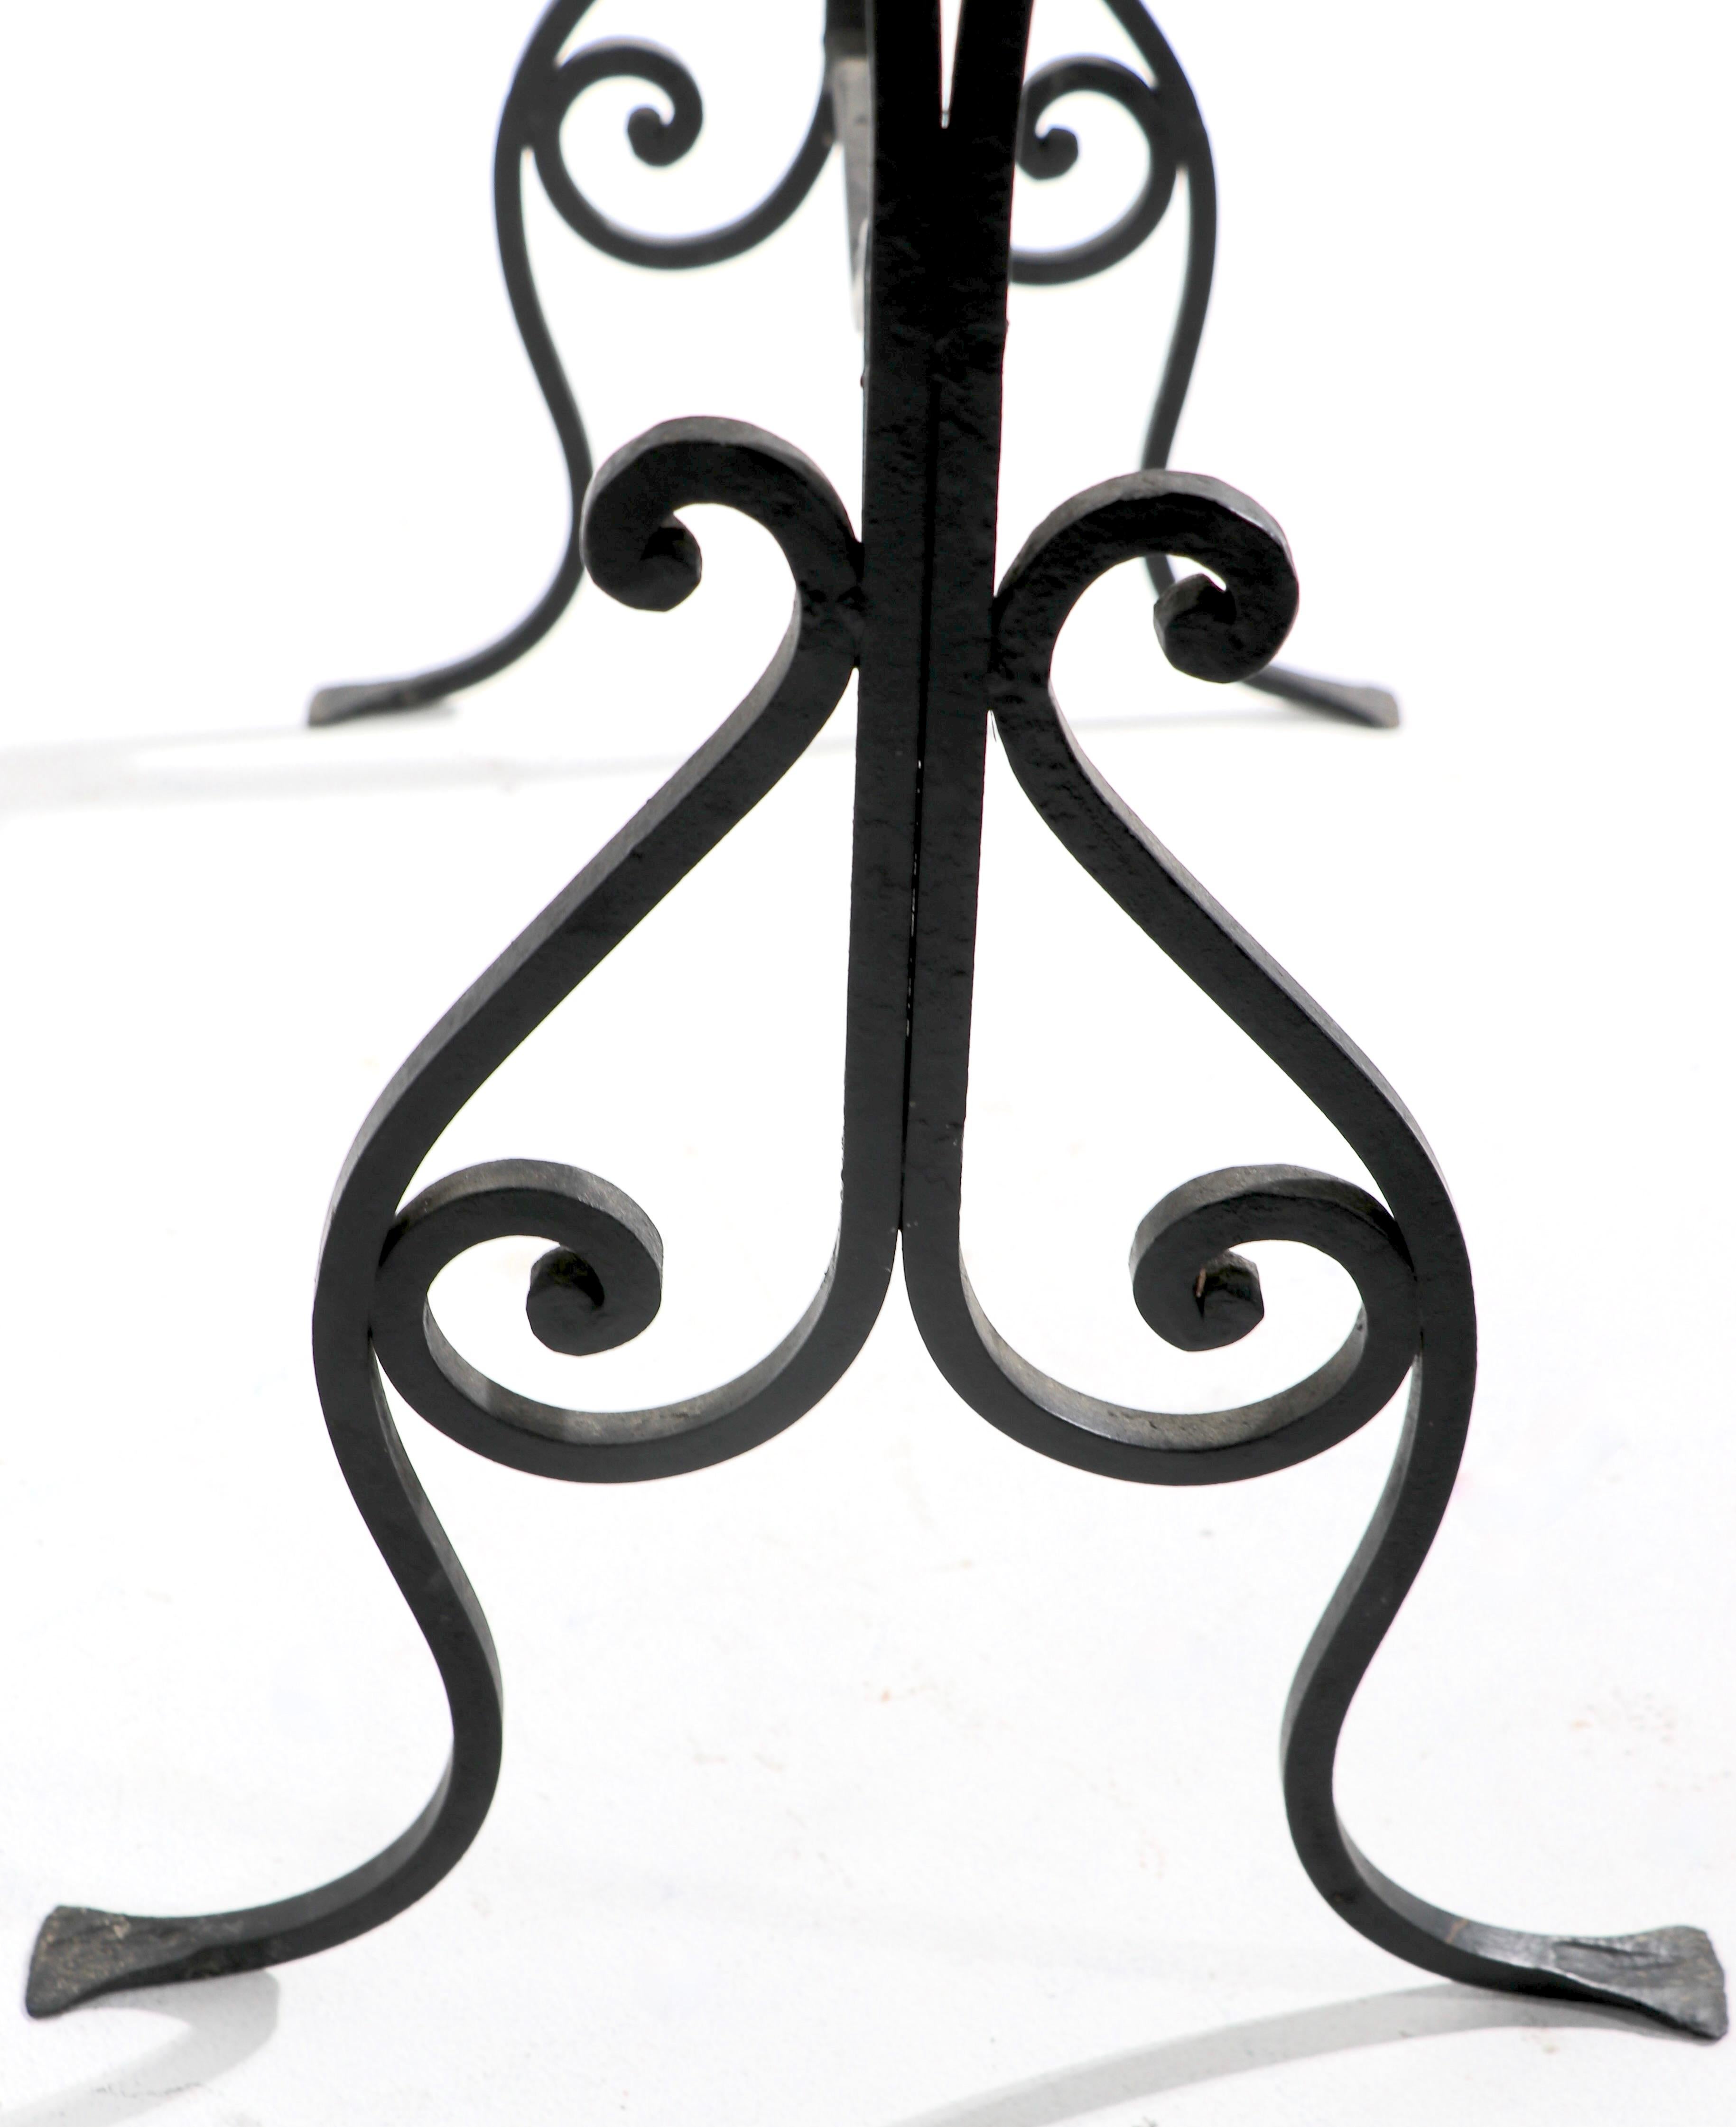 Wrought Iron Tile Top Table 3